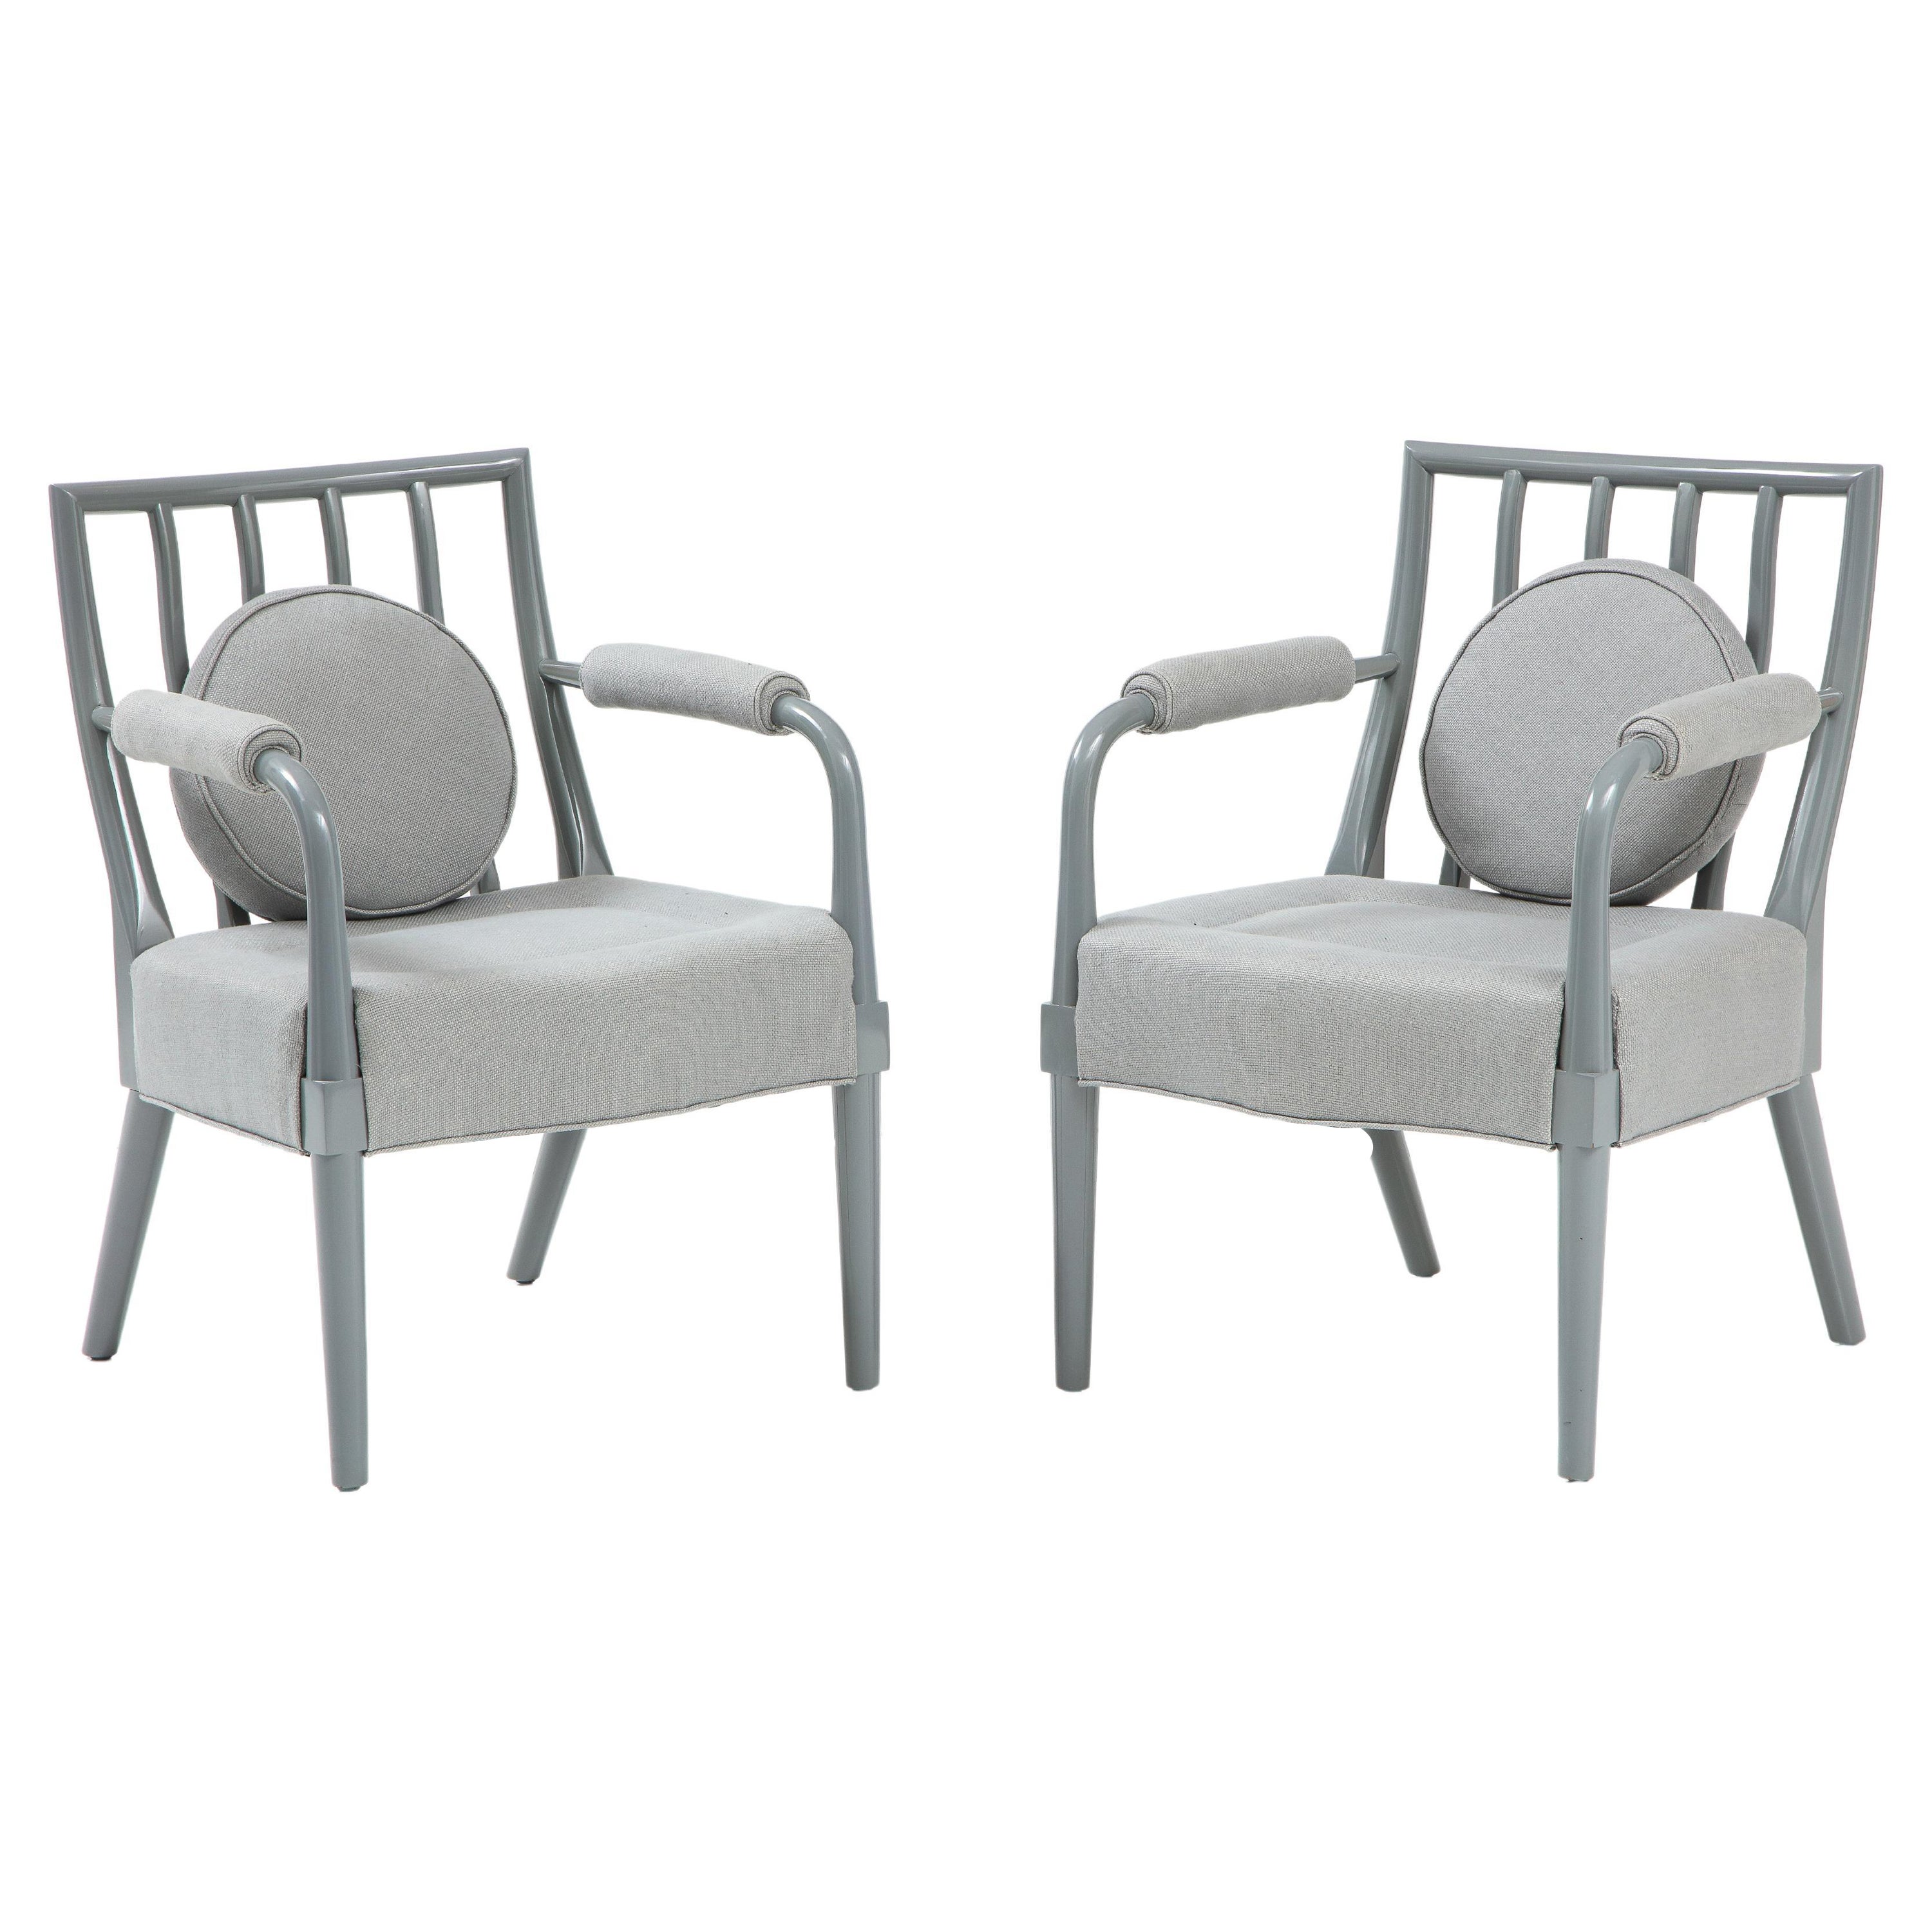 Pair of Armchairs by T.H. Robsjohn-Gibbings, United States, c. 1950 For Sale